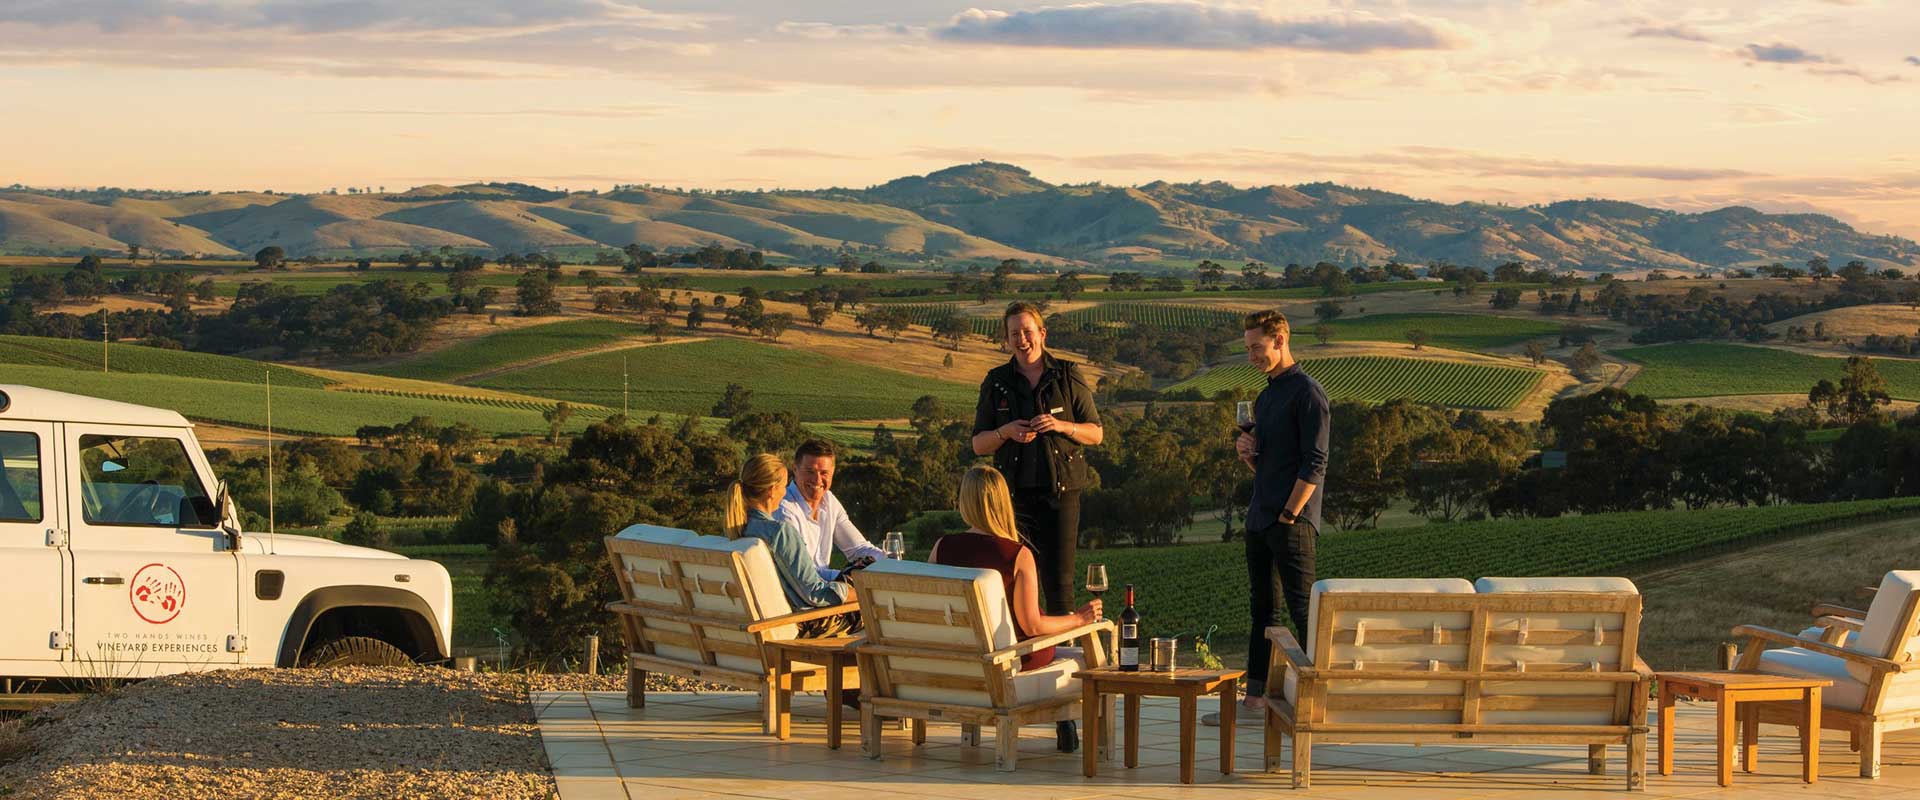 Two Hands Vineyard Experiences, Barossa Valley | Photo by South Australia Tourism